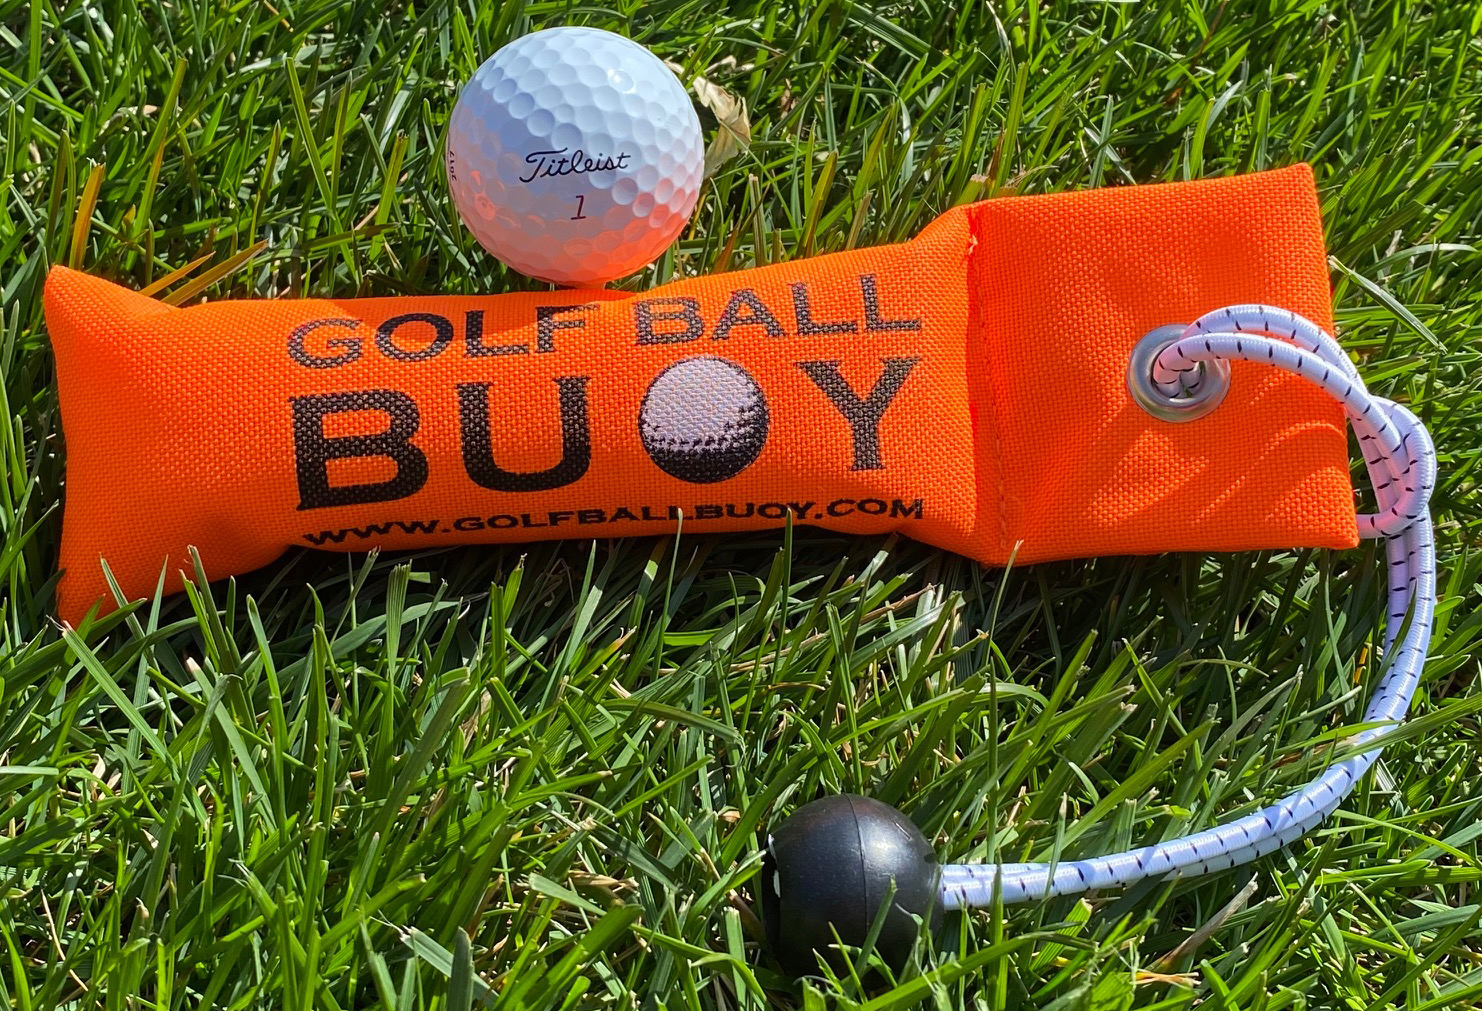 Golfer tired of searching lost balls invents and launches startup - Richmond BizSense